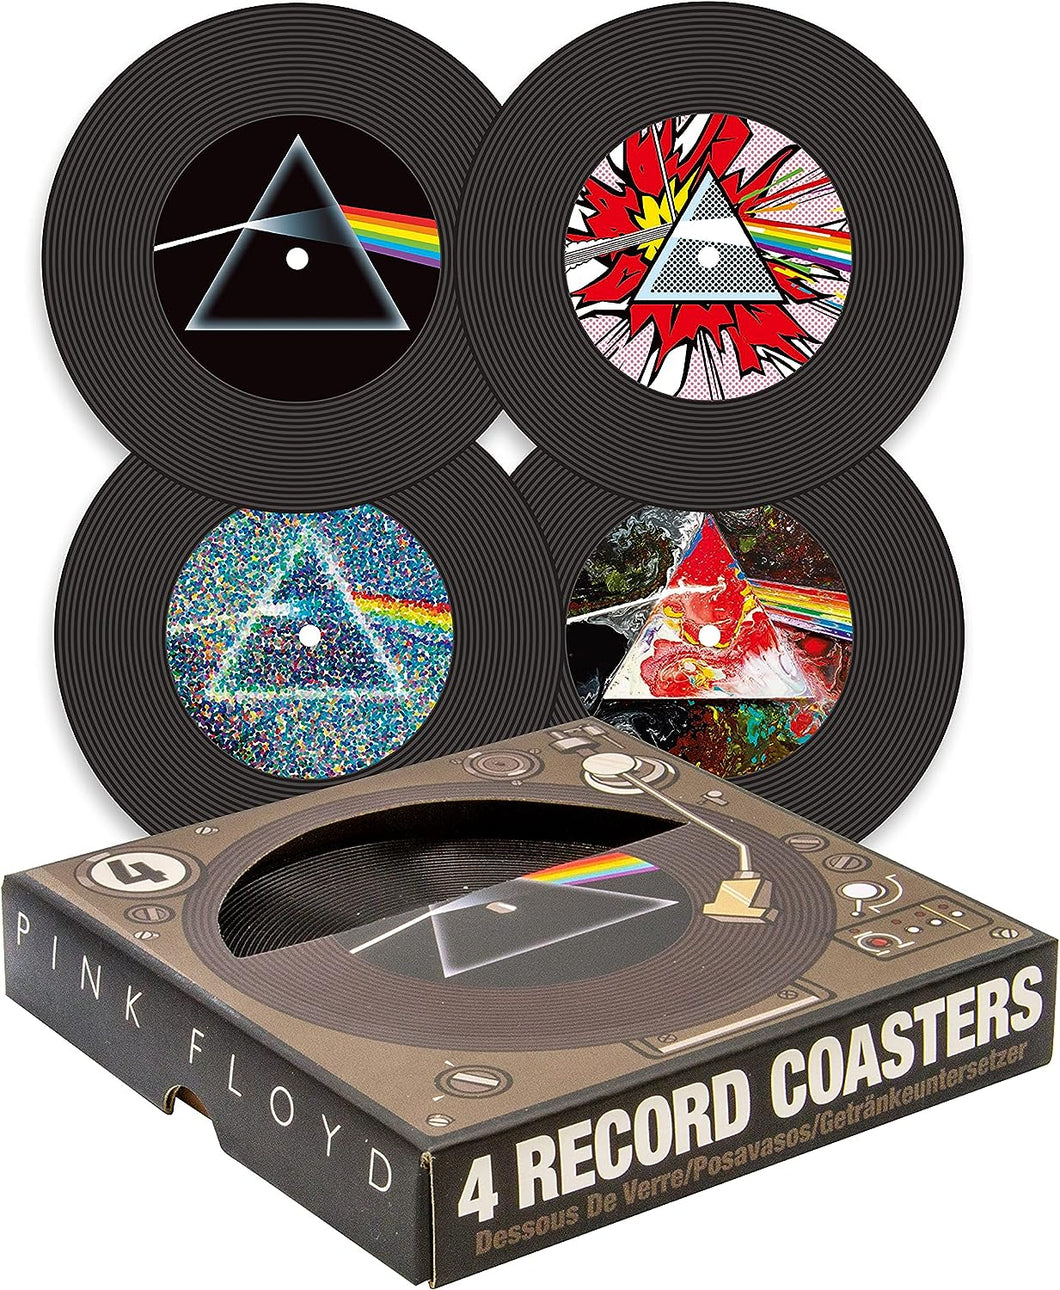 Pink Floyd Record Coasters - Set of 4